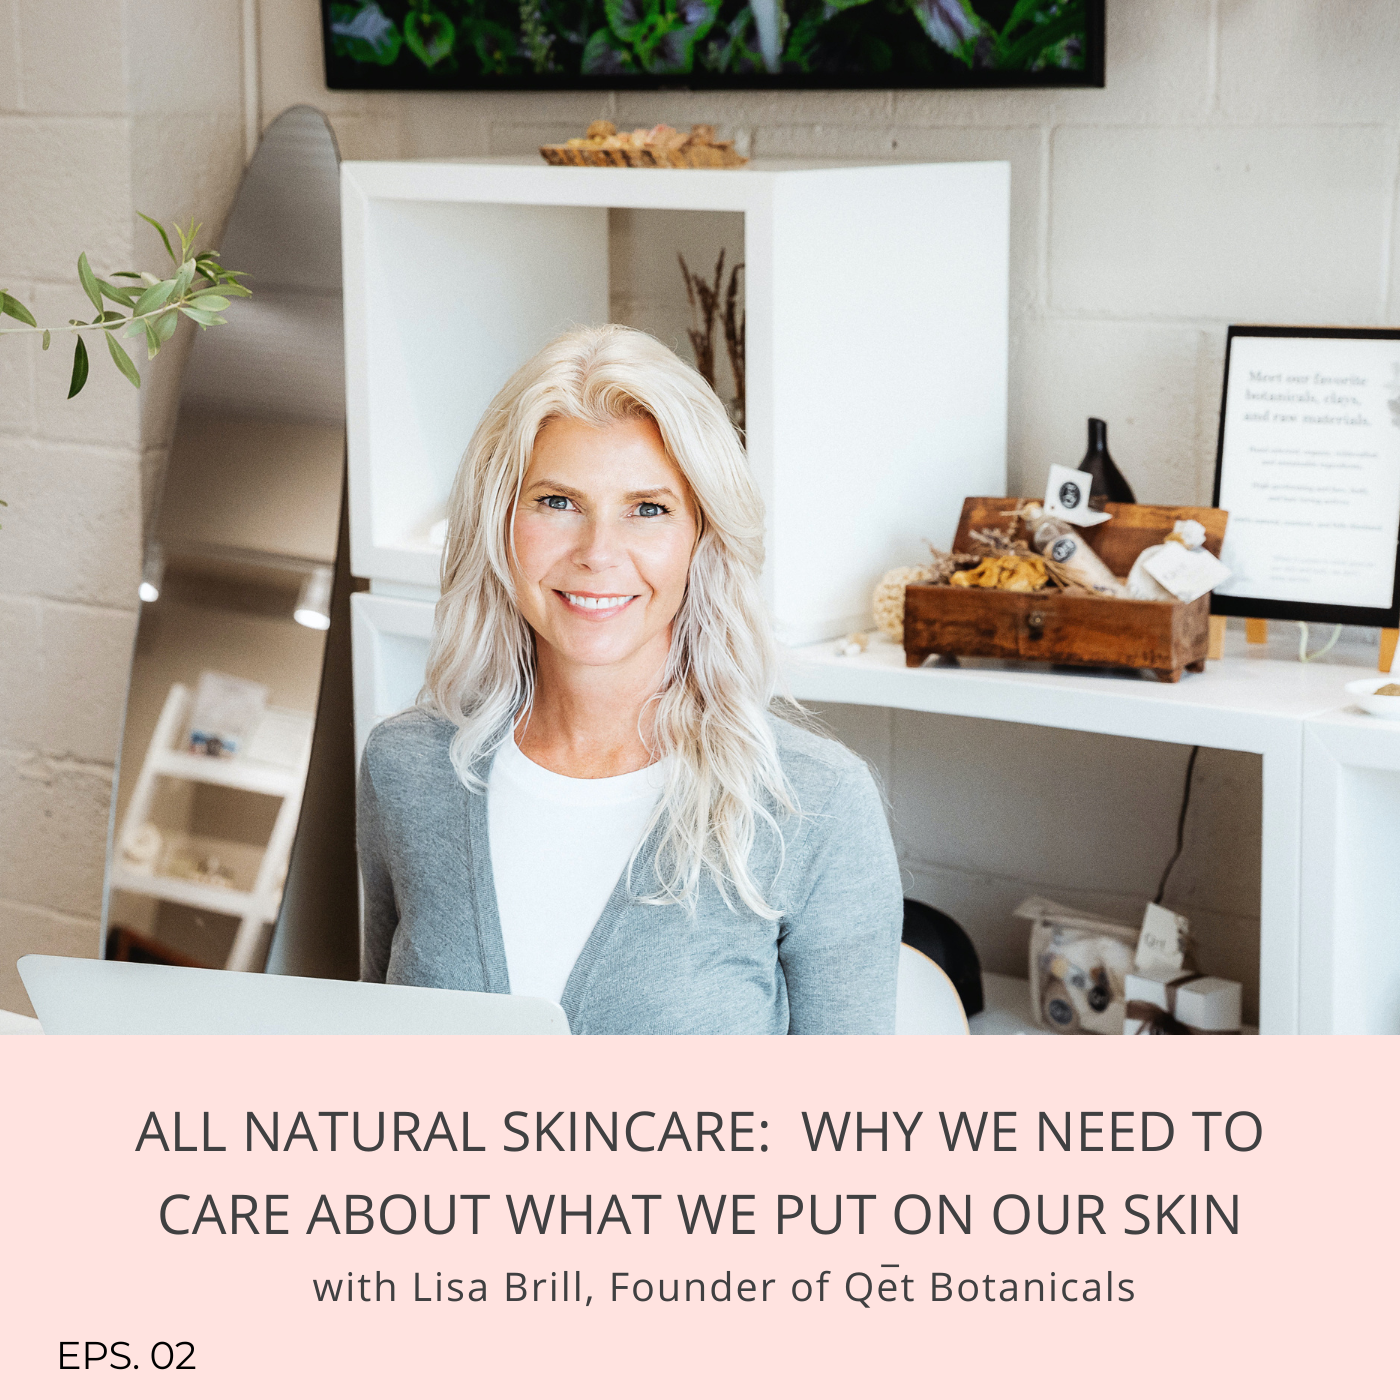 Episode 2: All Natural Skincare: Why we need to care about what we put on our skin with Lisa Brill, Founder of Qet Botanicals